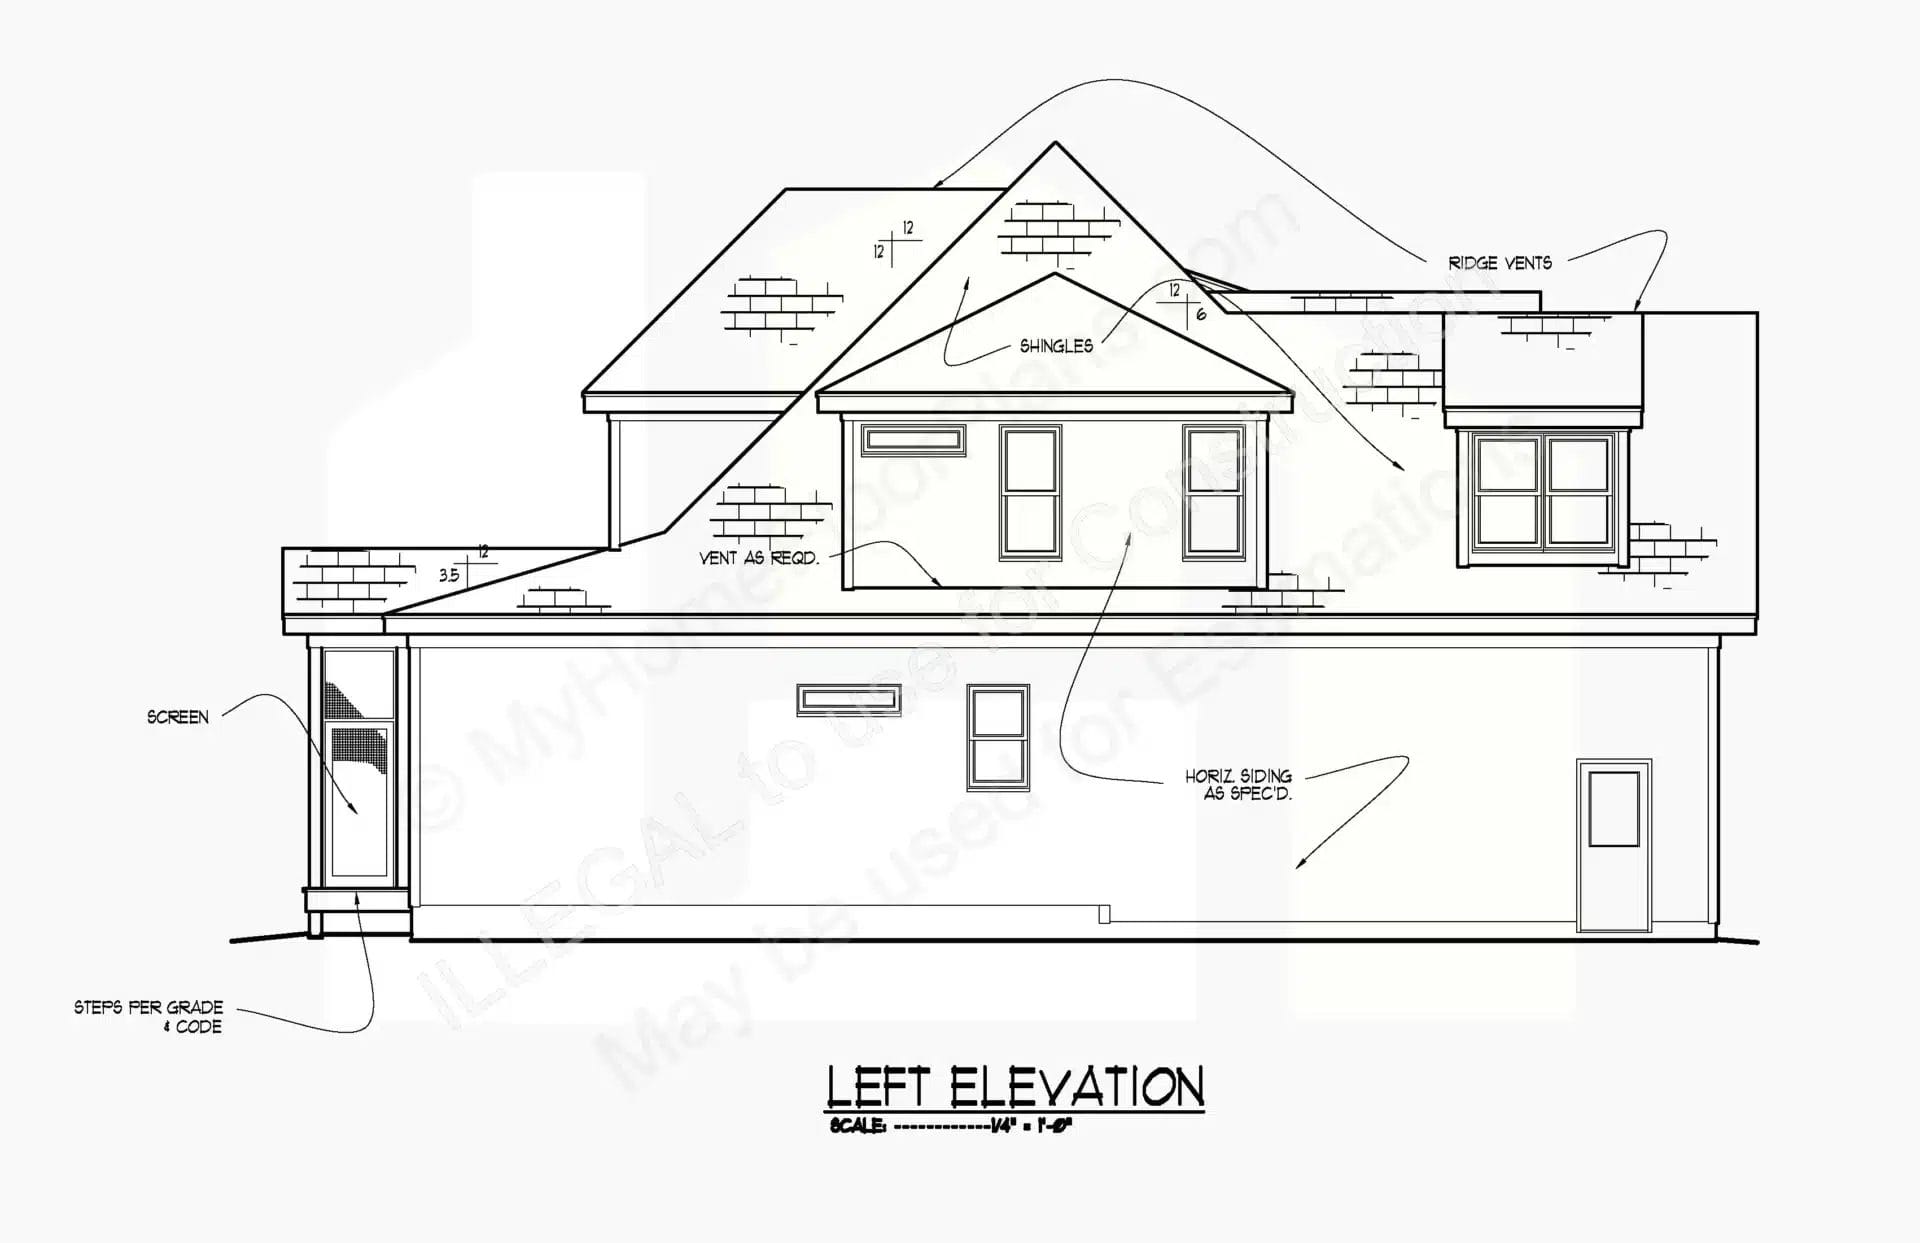 Architectural drawing of a 13-1214's left elevation featuring labeled dimensions and components such as roof, windows, and vents, drawn with precise lines and annotations for clarity.